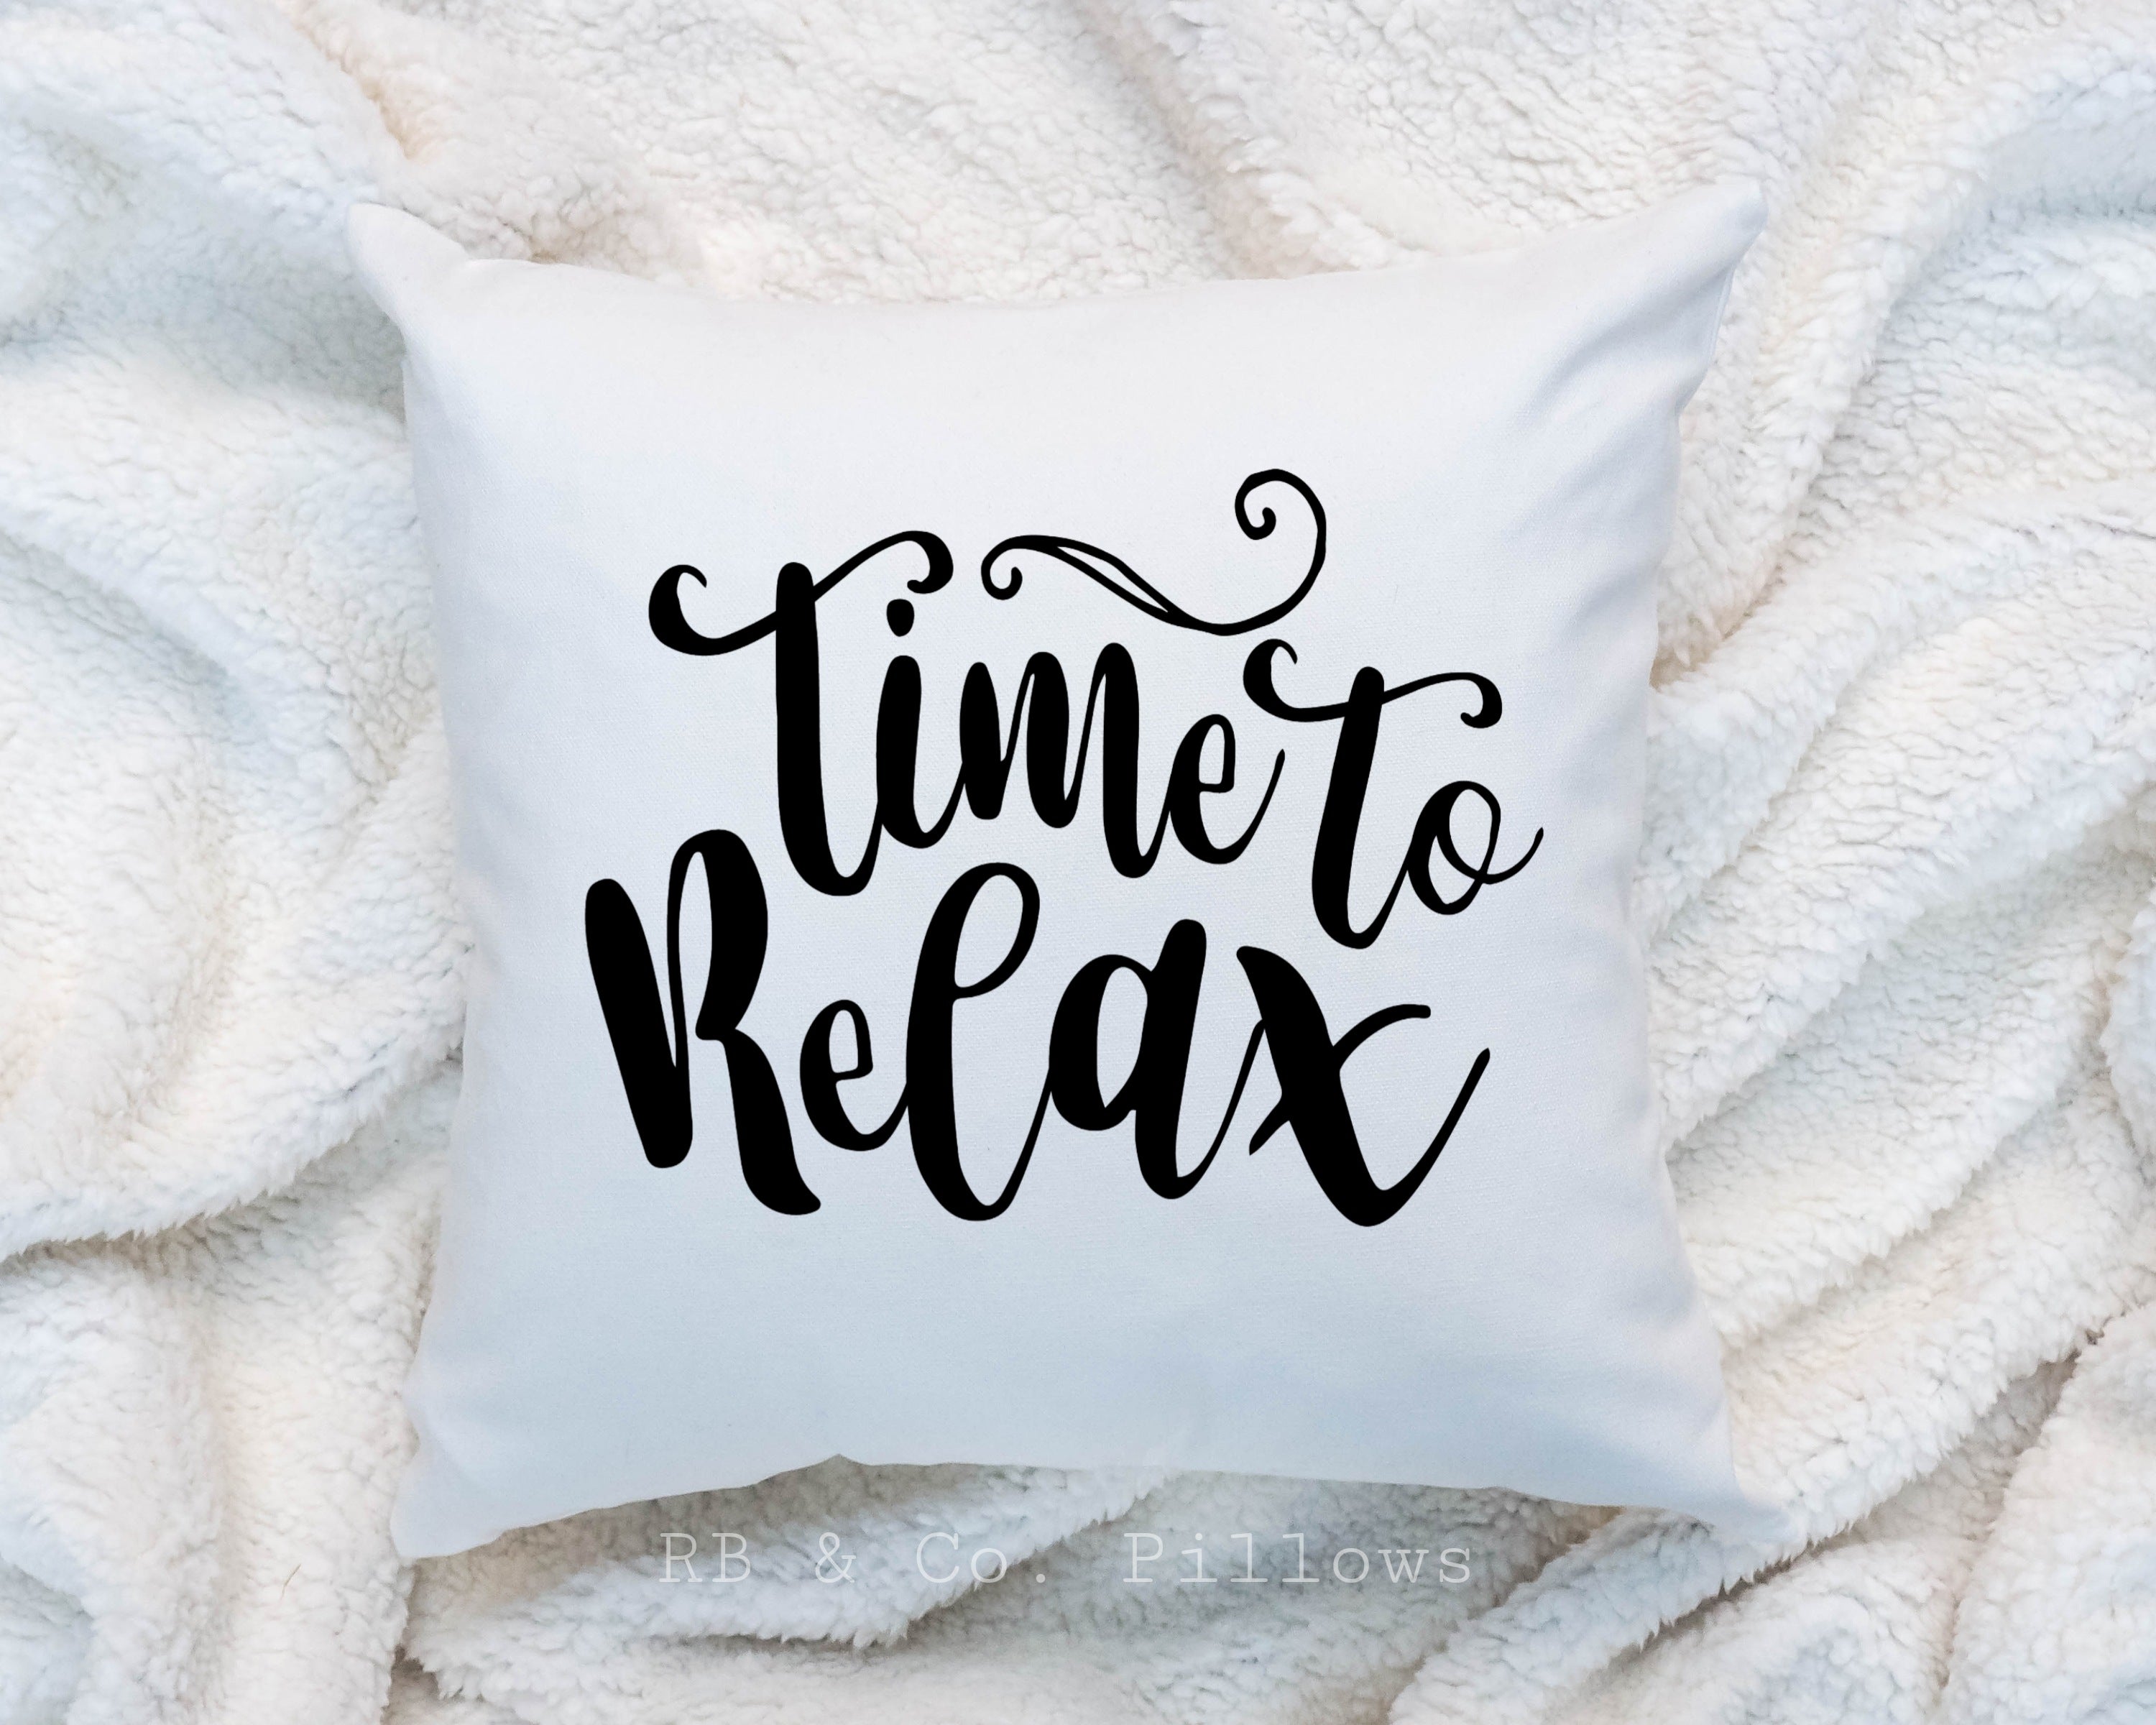 Hugs and Kisses Love Inspirational Quote Words Pillow Cushion 18x18 In – RB  & Co. Pillows